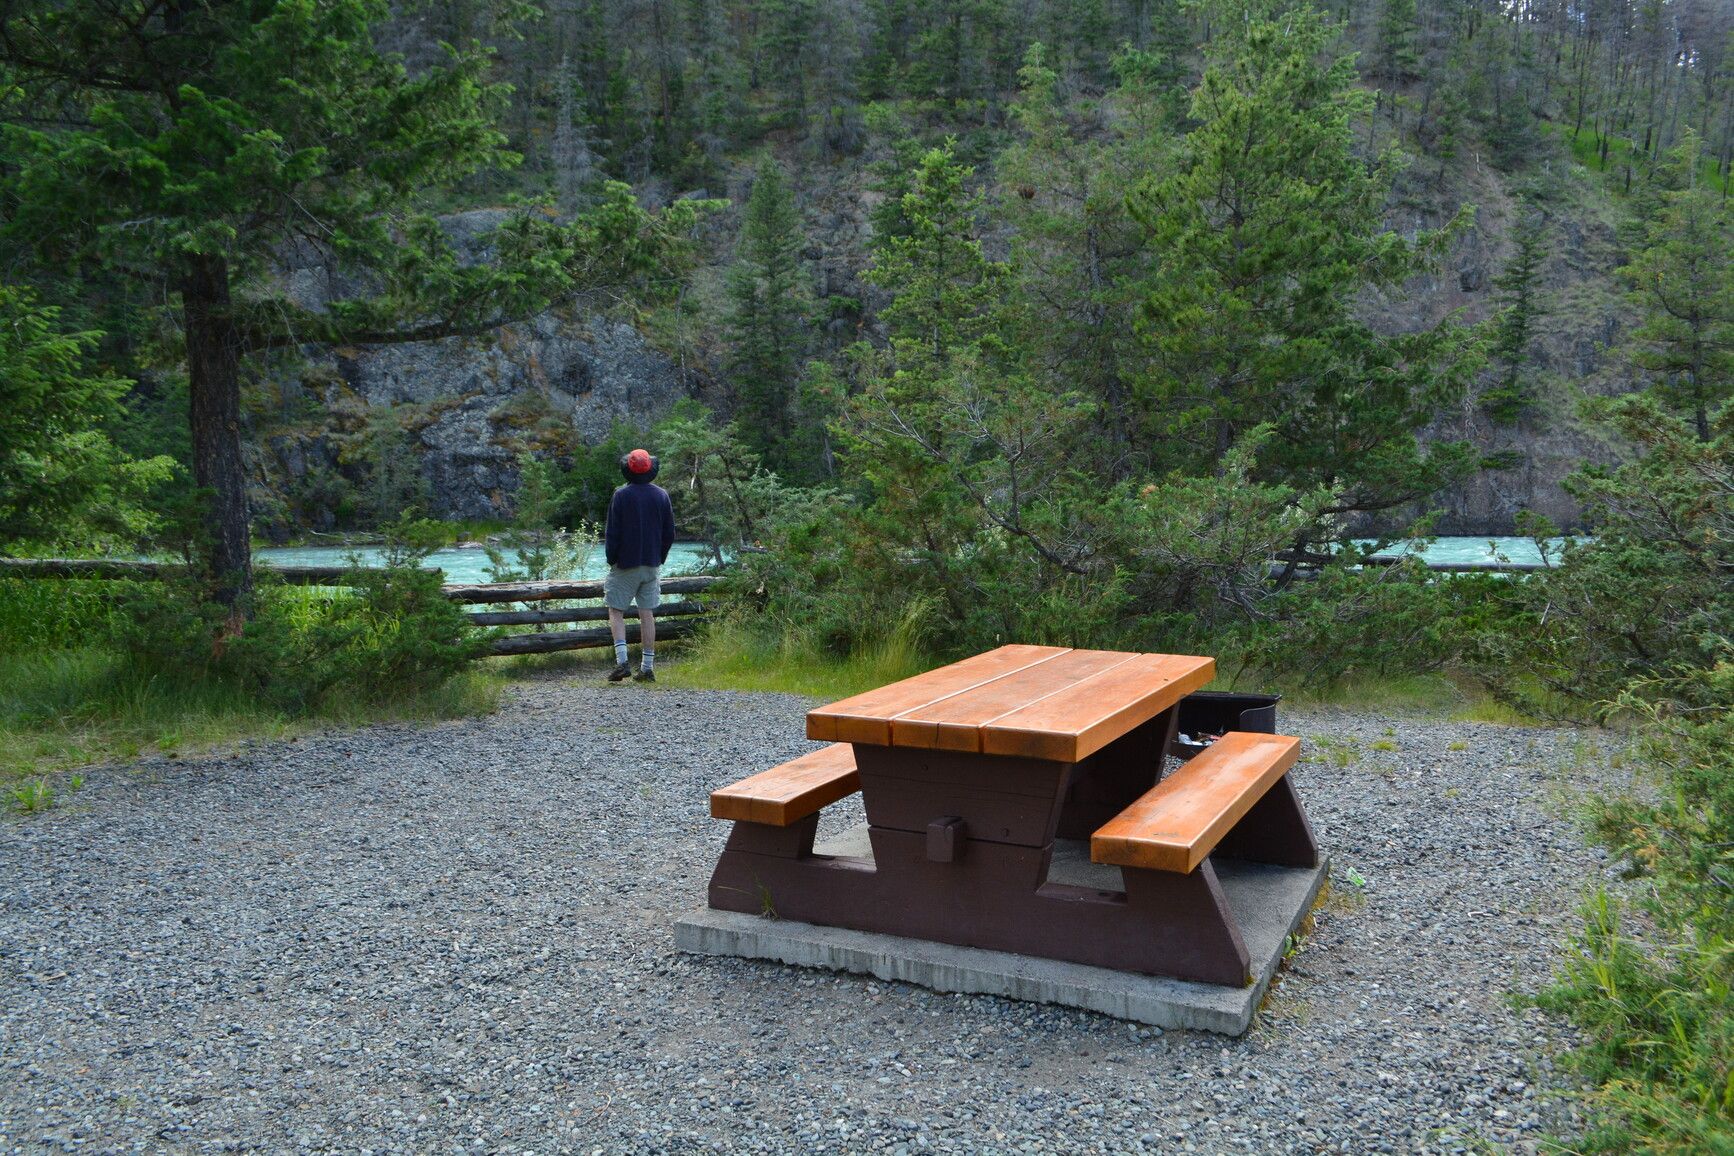 A campsite beside the Chilcotin river in Bull Canyon Park.